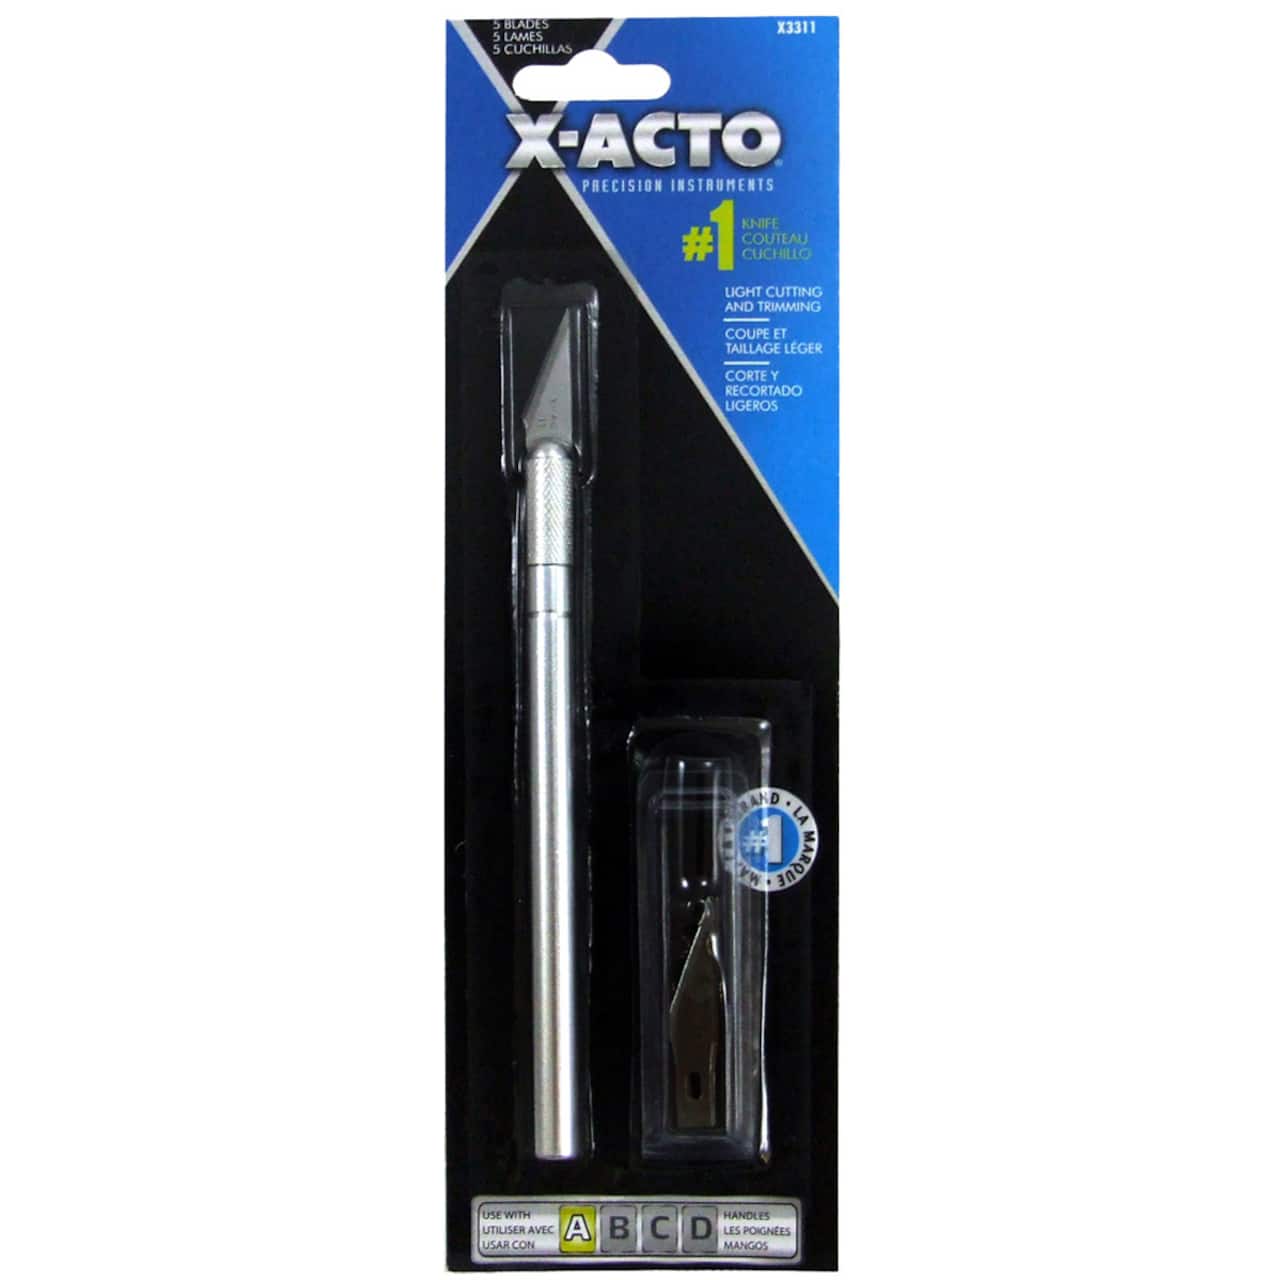 X-ACTO&#xAE; #1 Precision Knife with #11 Blades